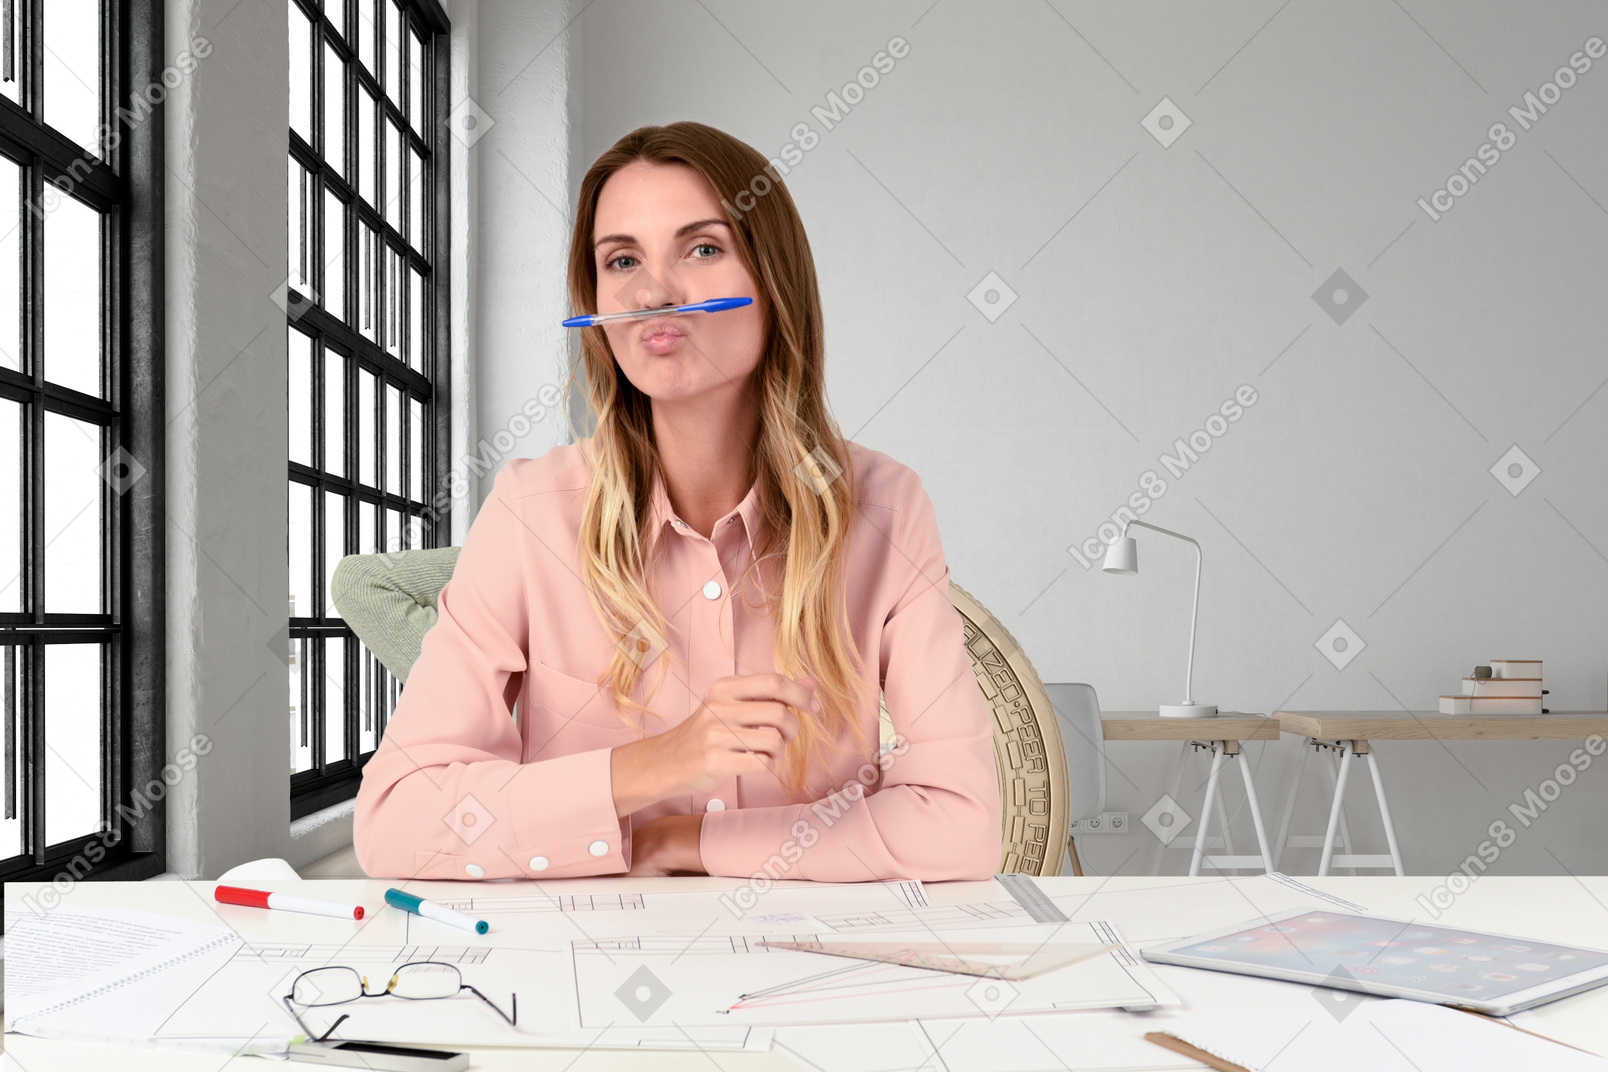 A woman in her office